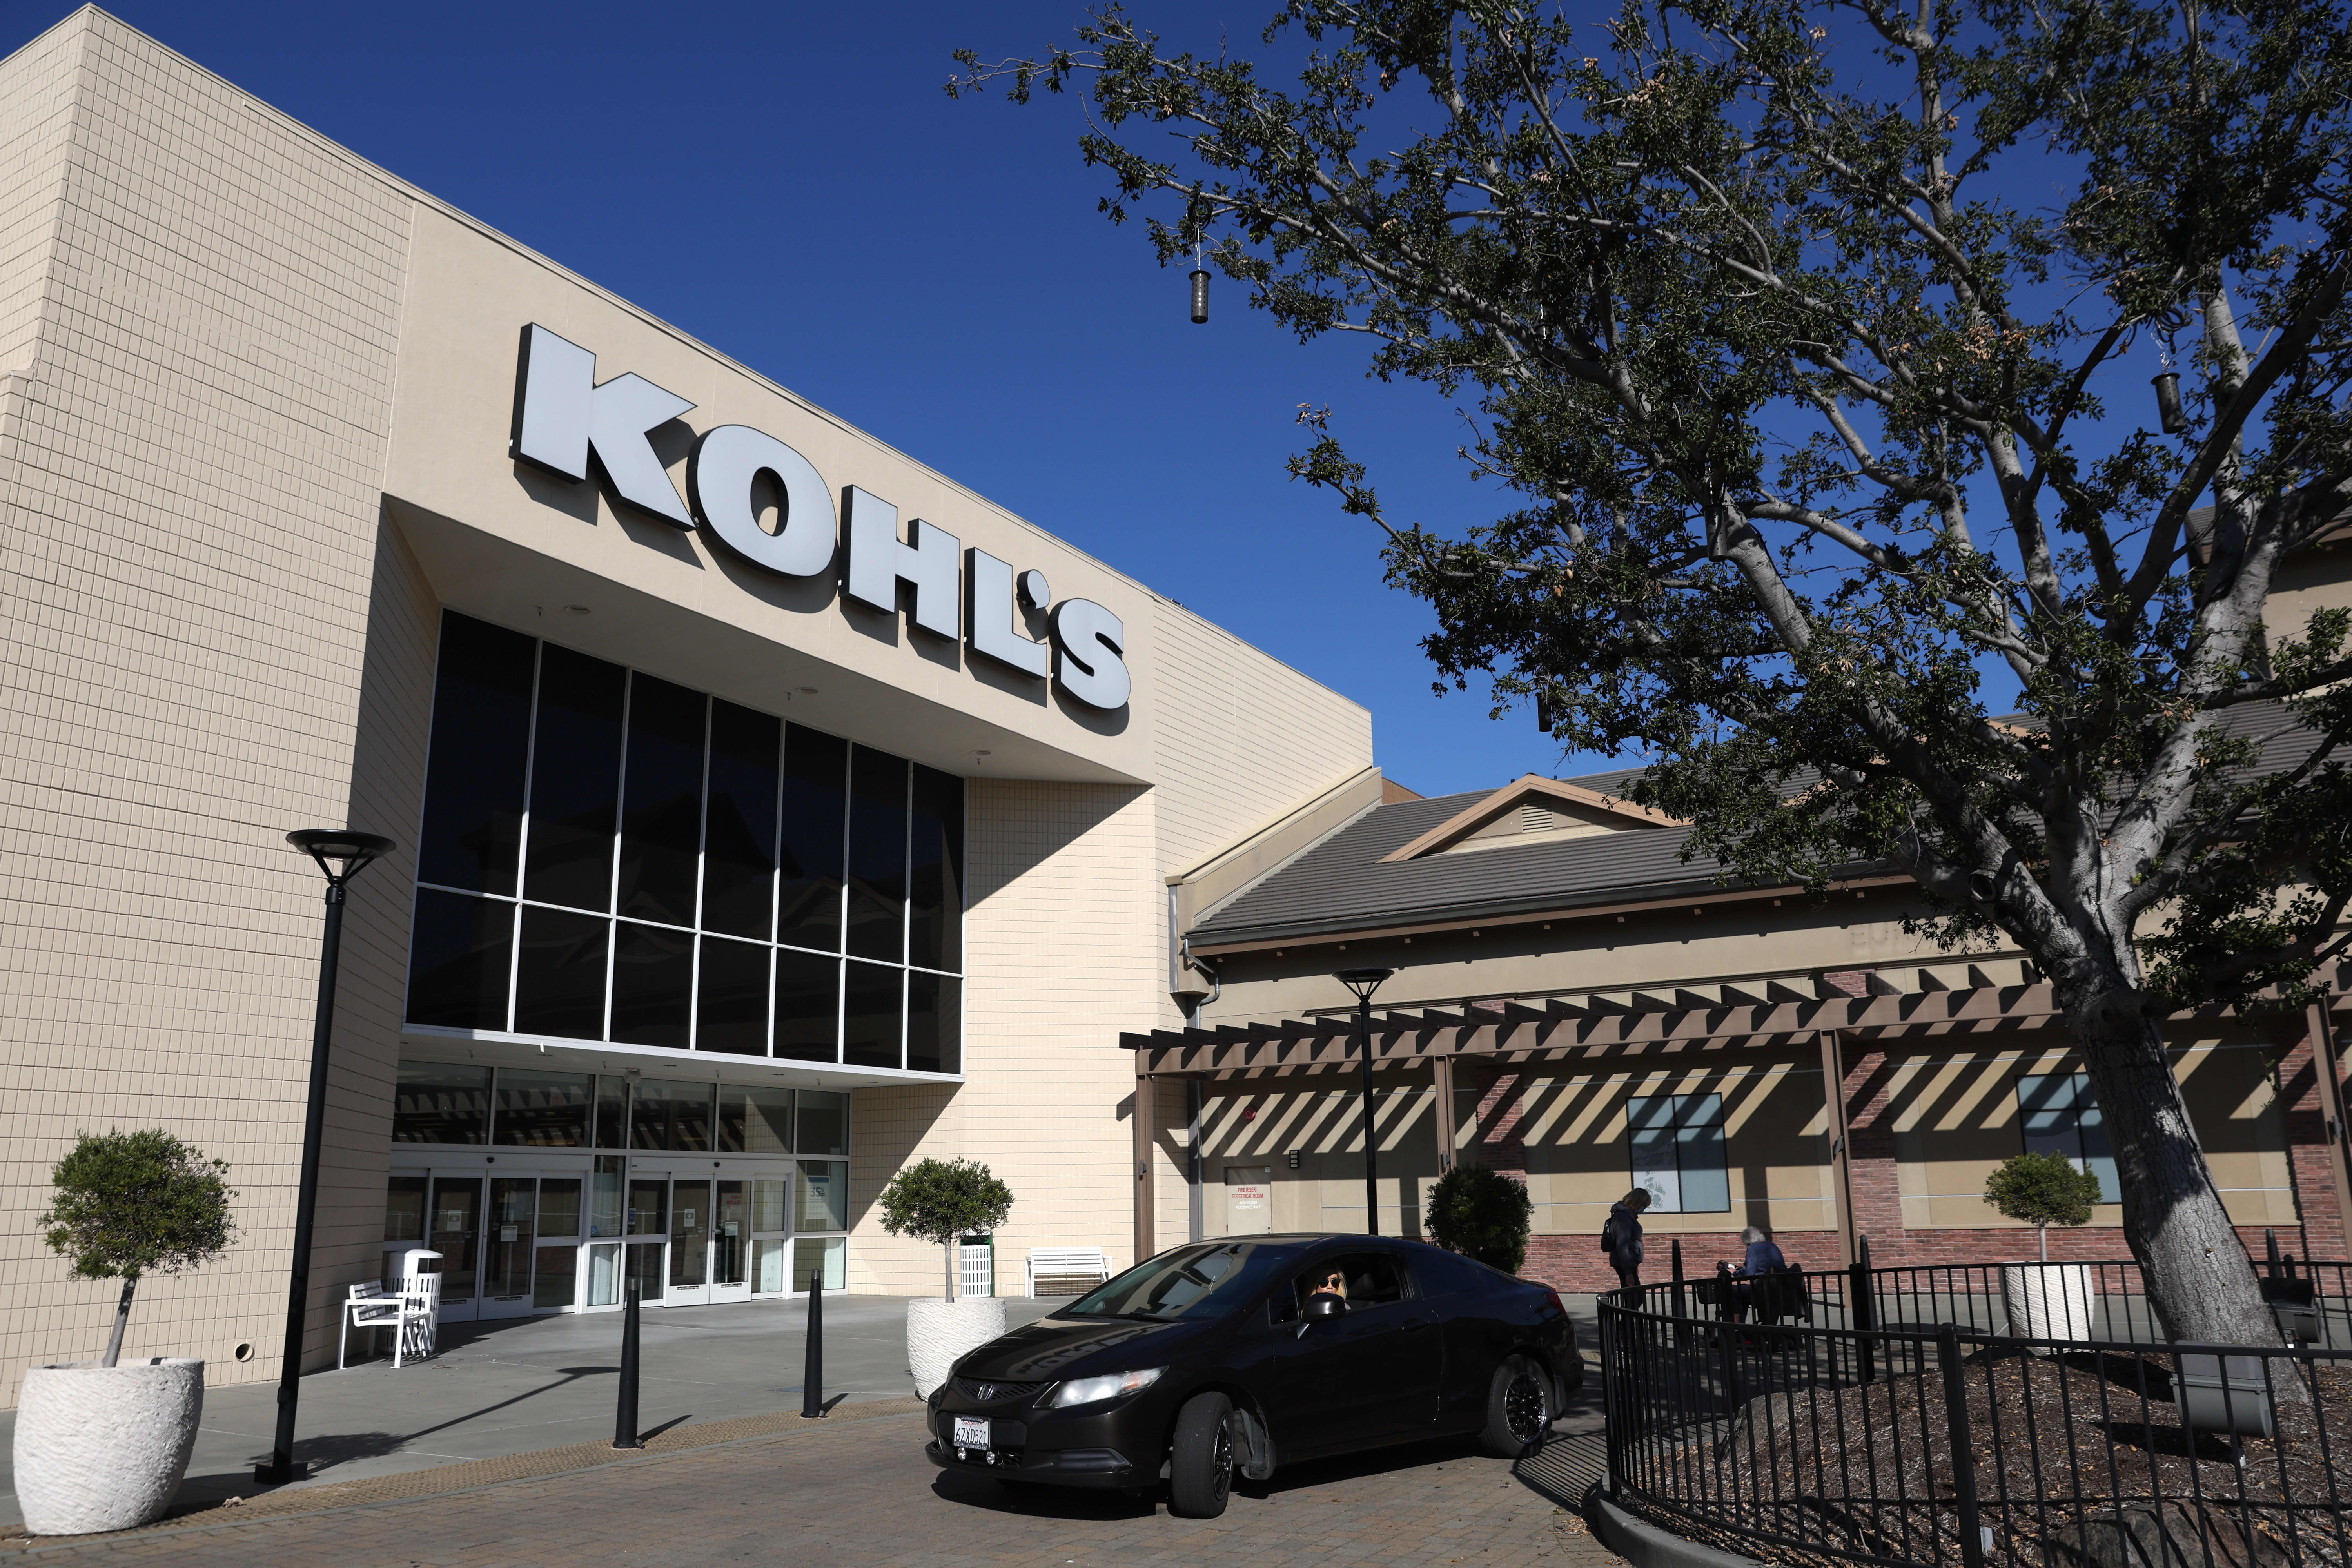 Kohl’s reports light sales for the holiday quarter, issues upbeat guidance